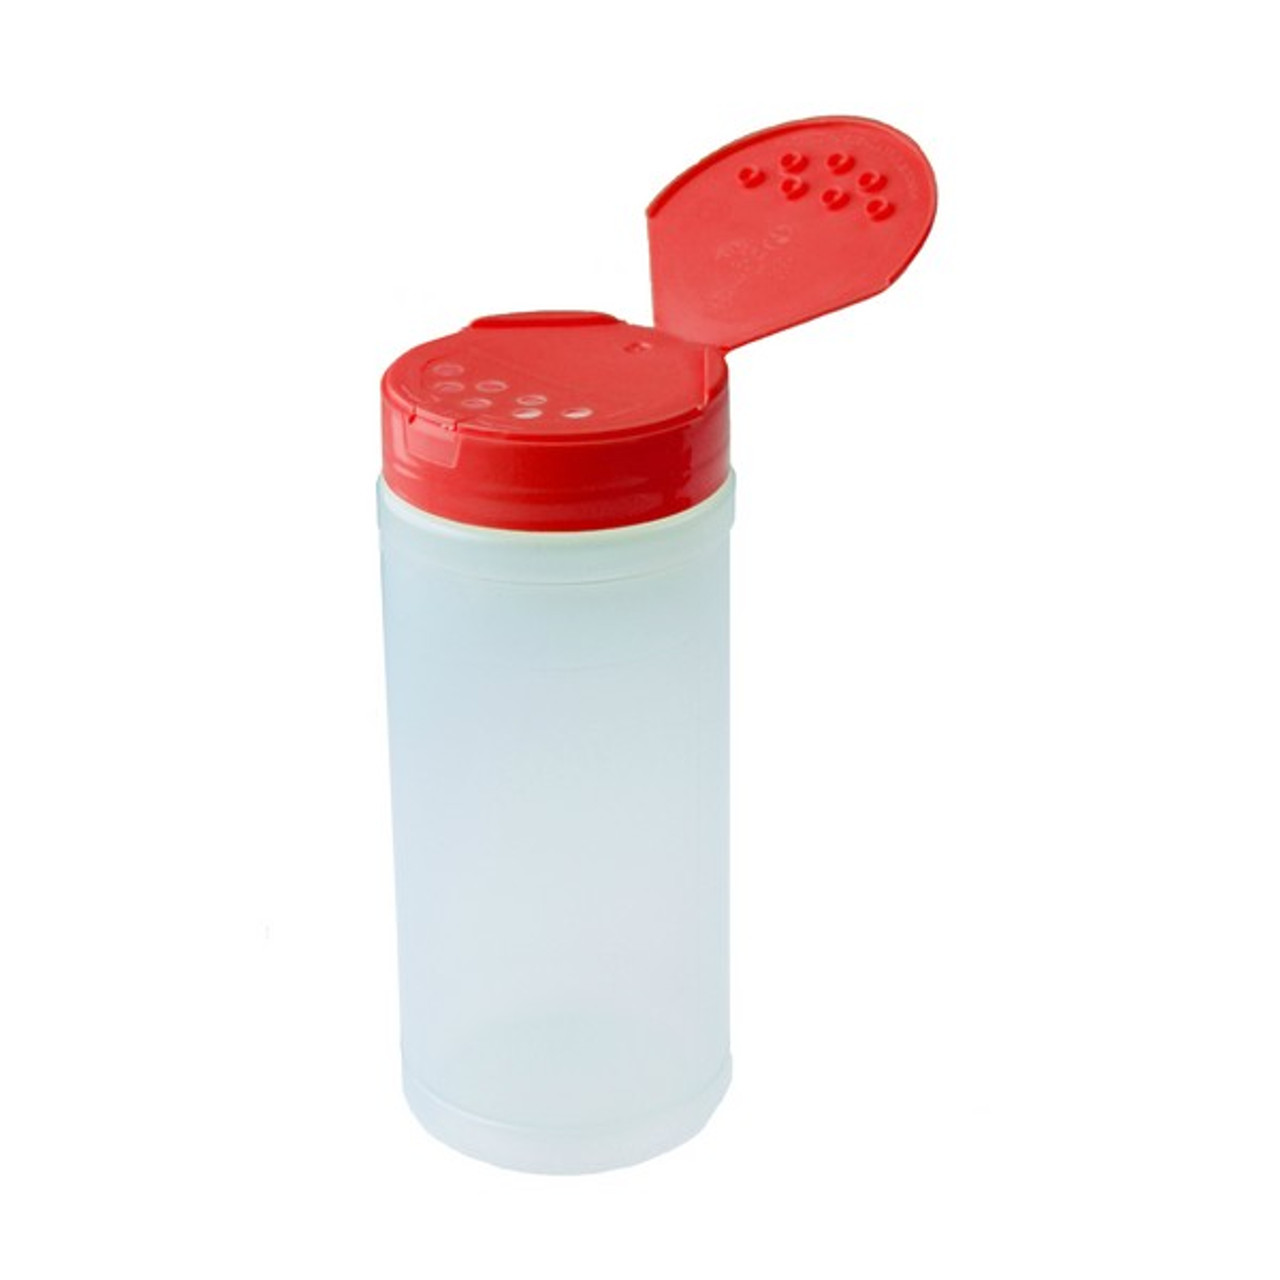 Large Plastic Spice Jar with Sifter Cap